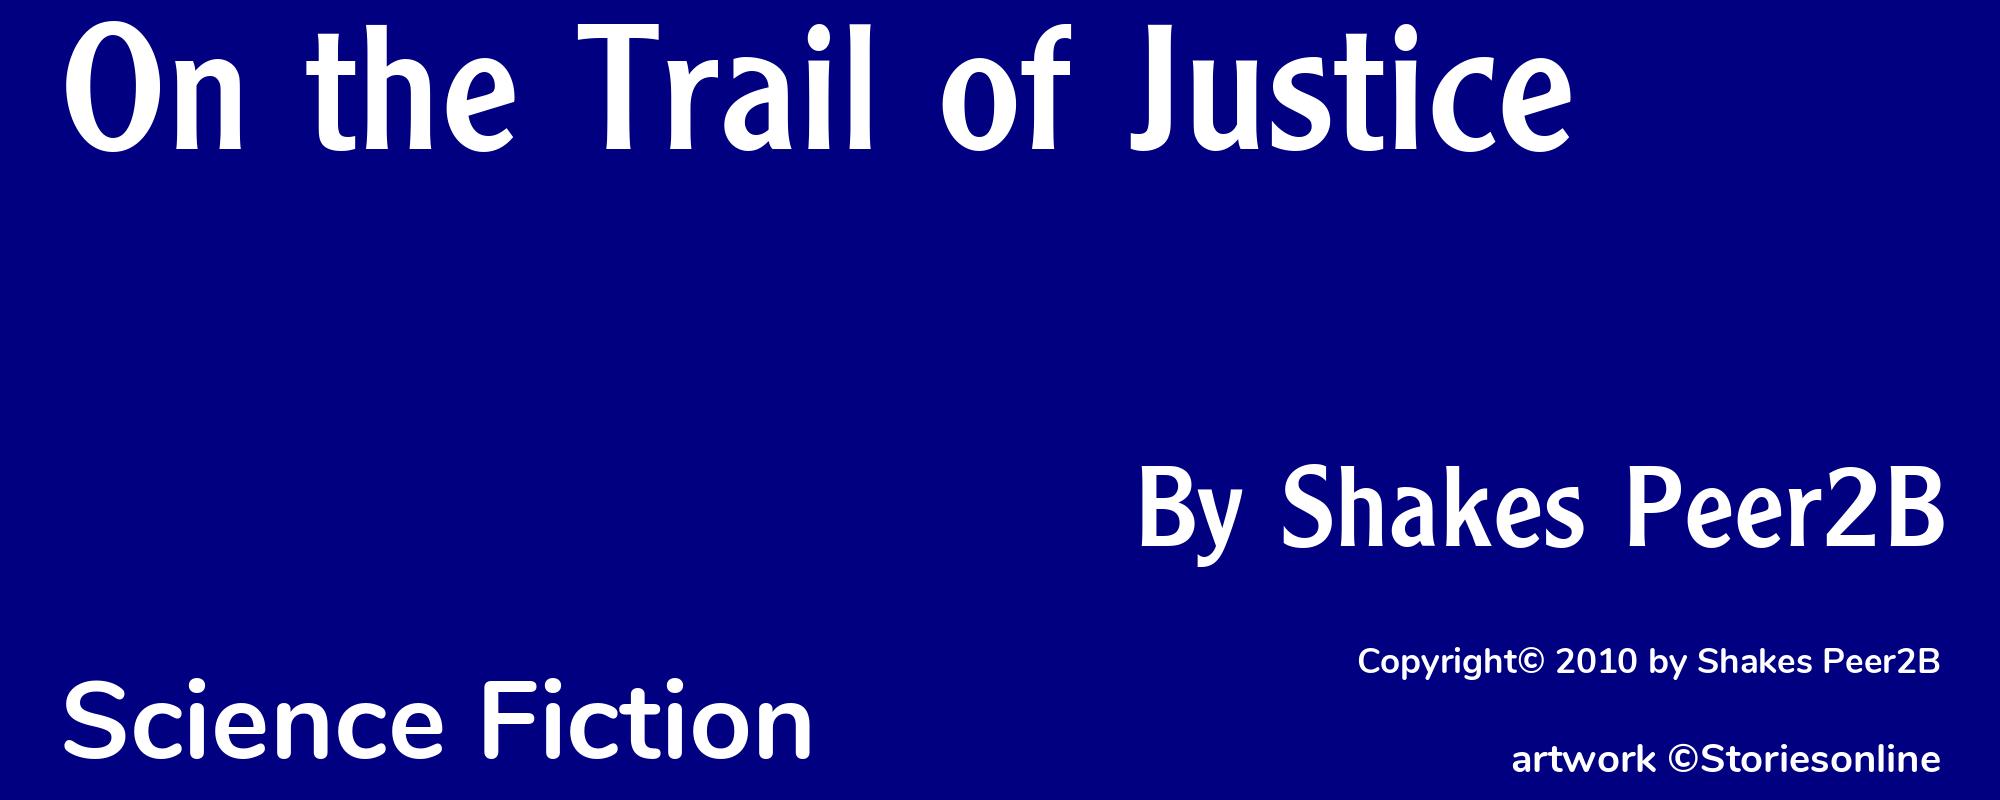 On the Trail of Justice - Cover